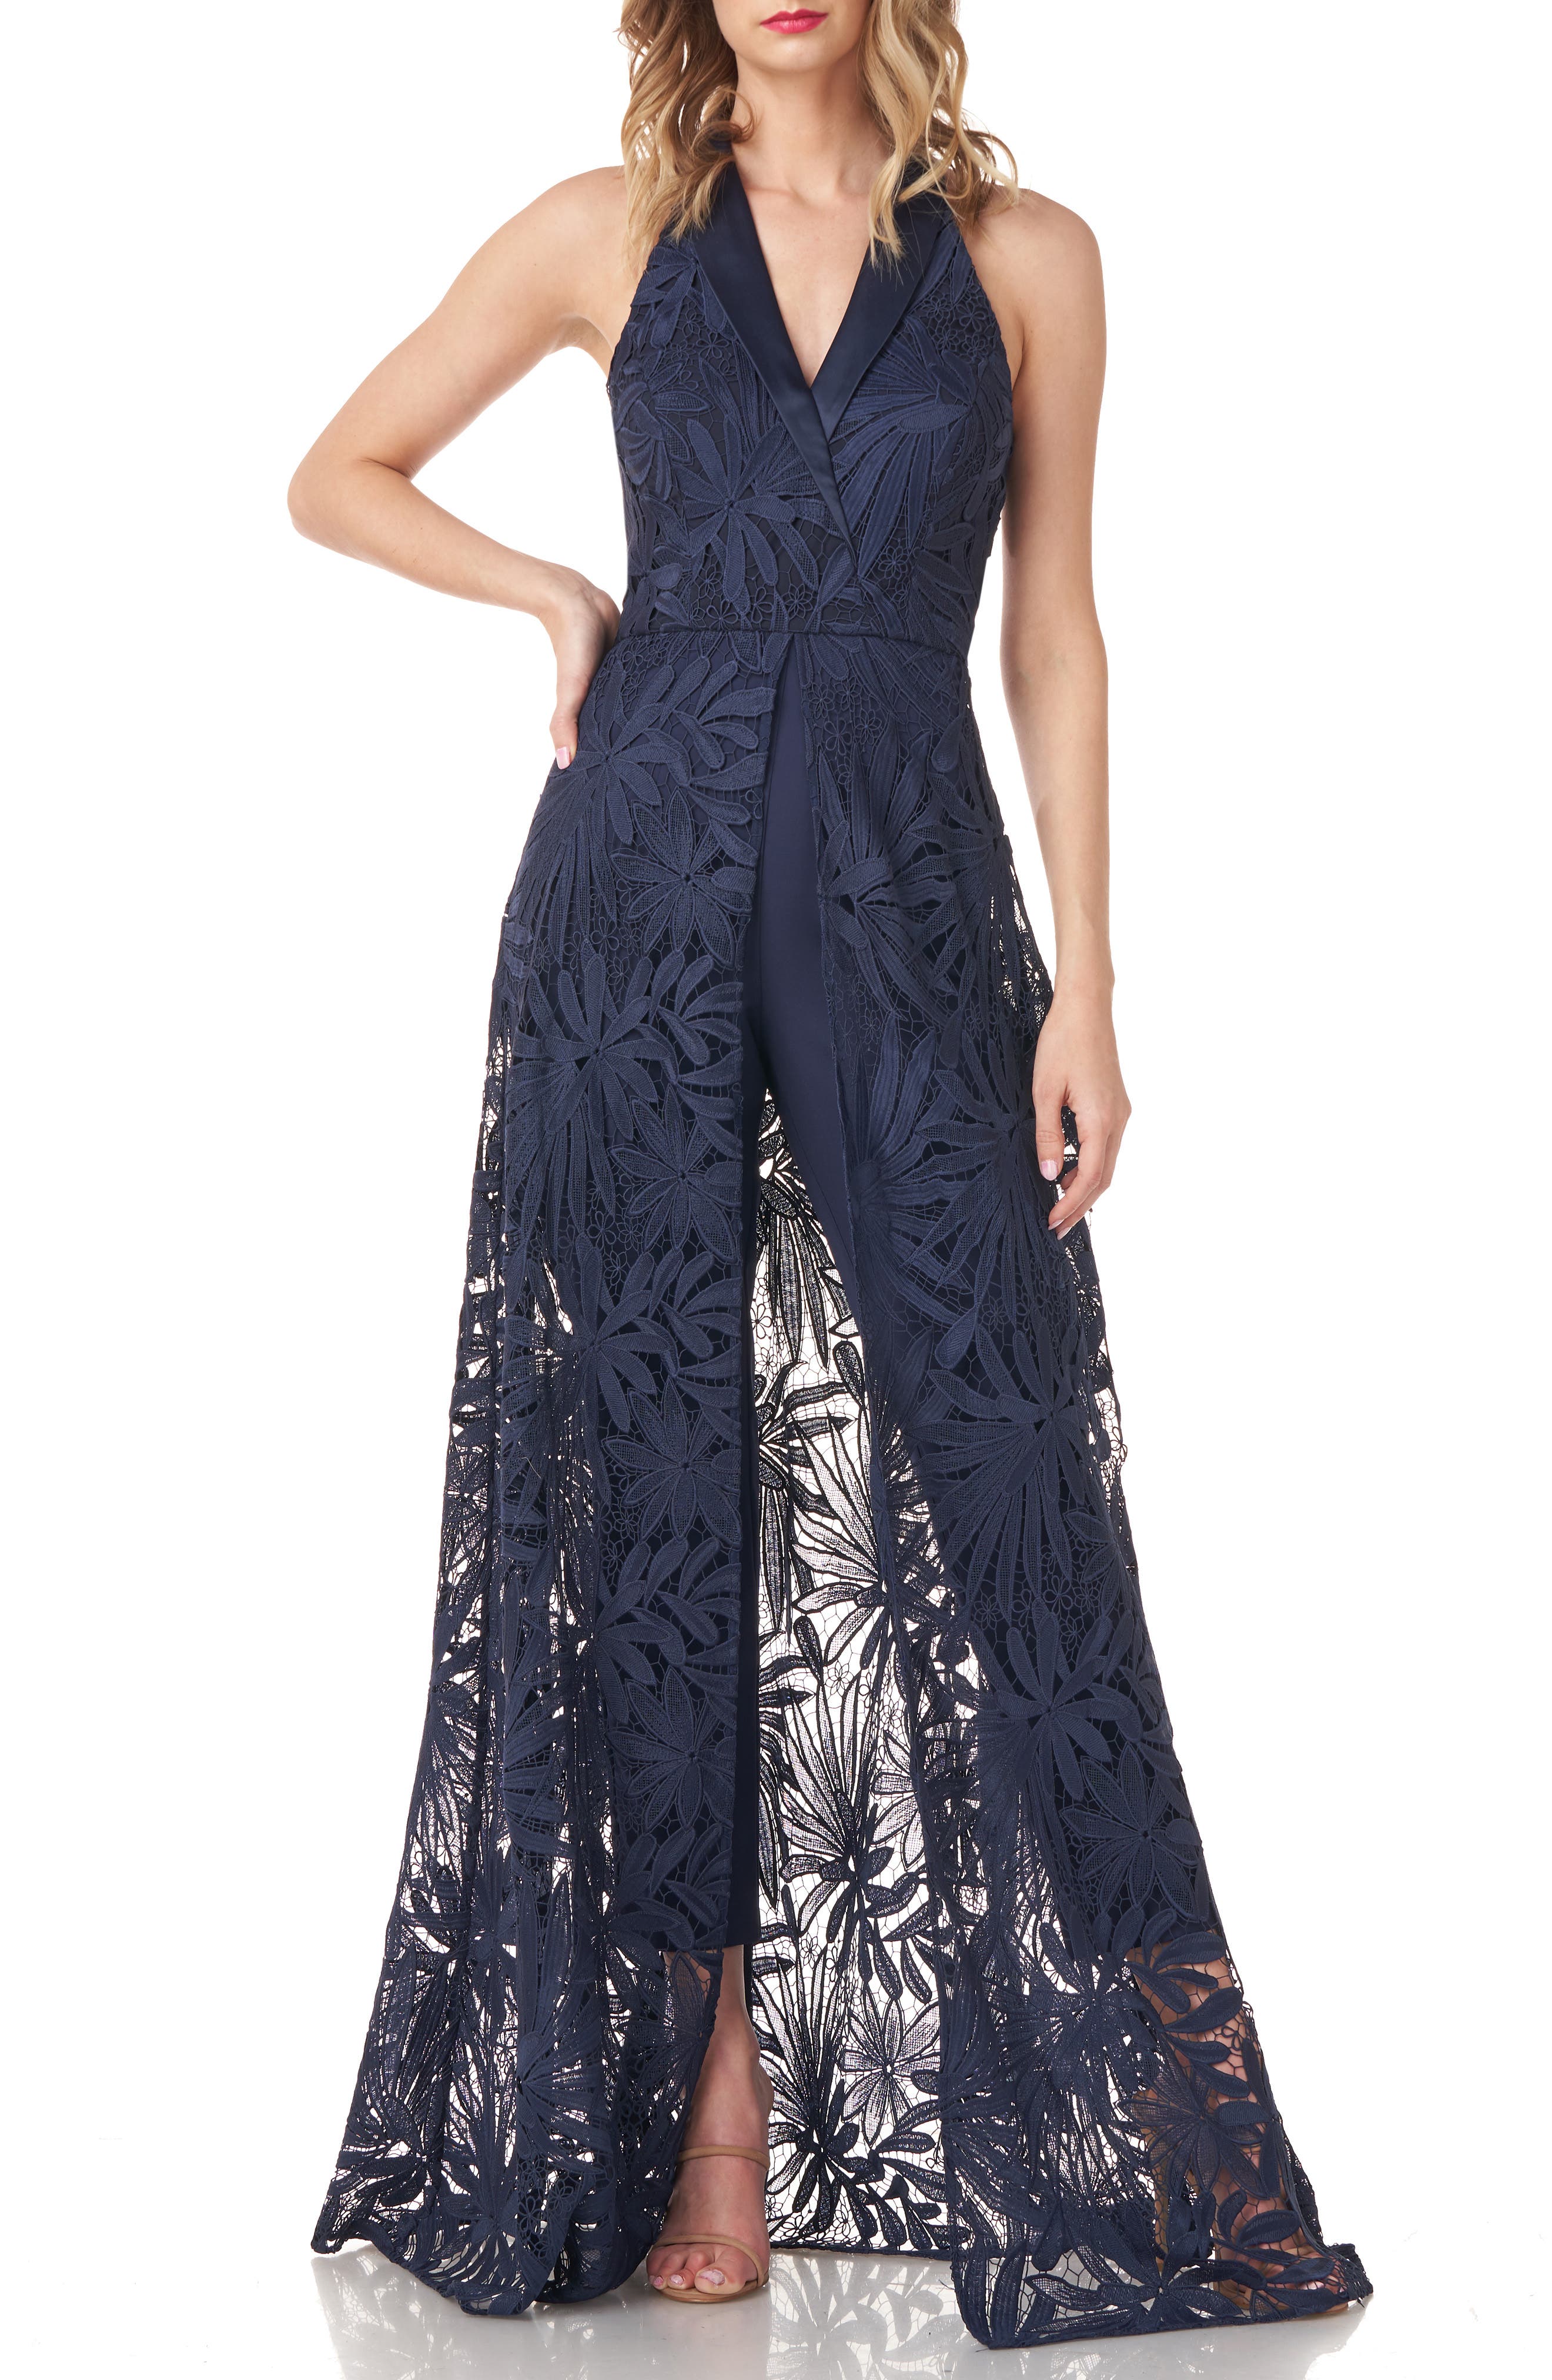 Kay Unger Lace Maxi Romper in Midnight